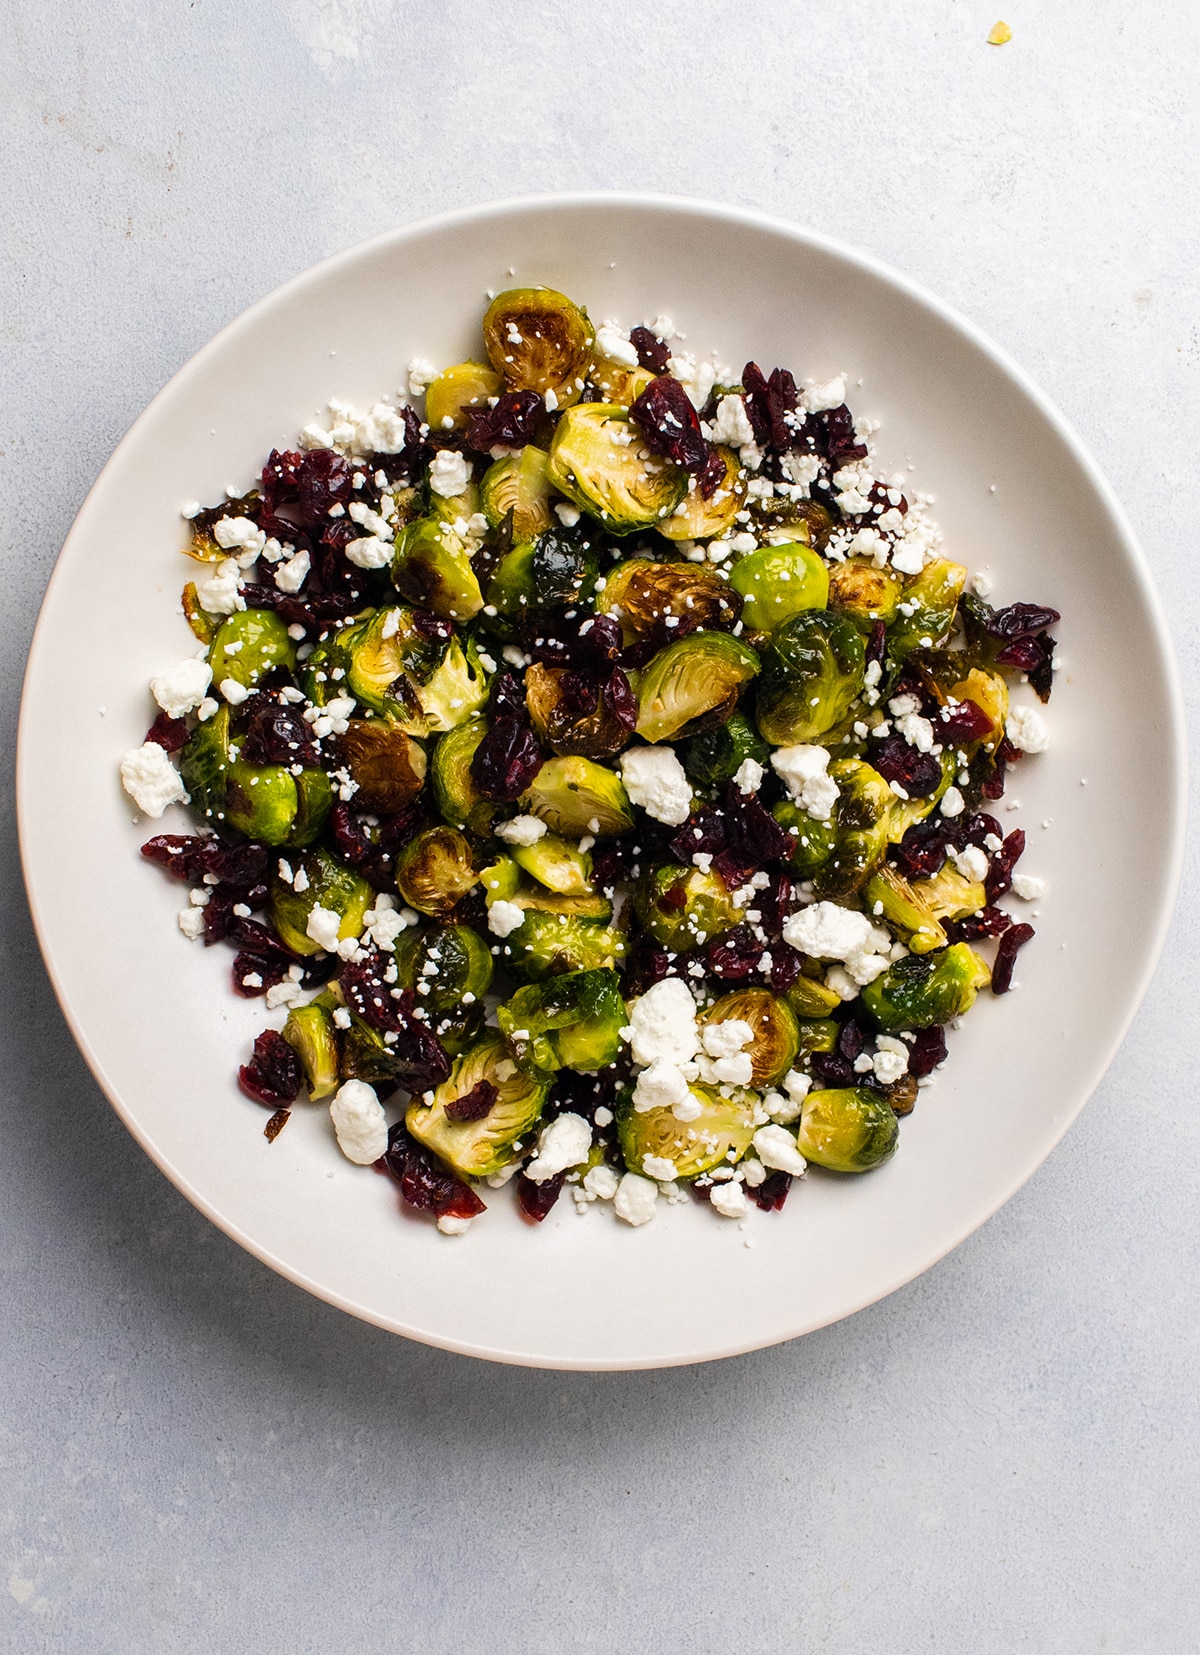 Overhead view of roasted brussels sprouts in a shallow white bowl with dried cranberries and crumbled goat cheese.